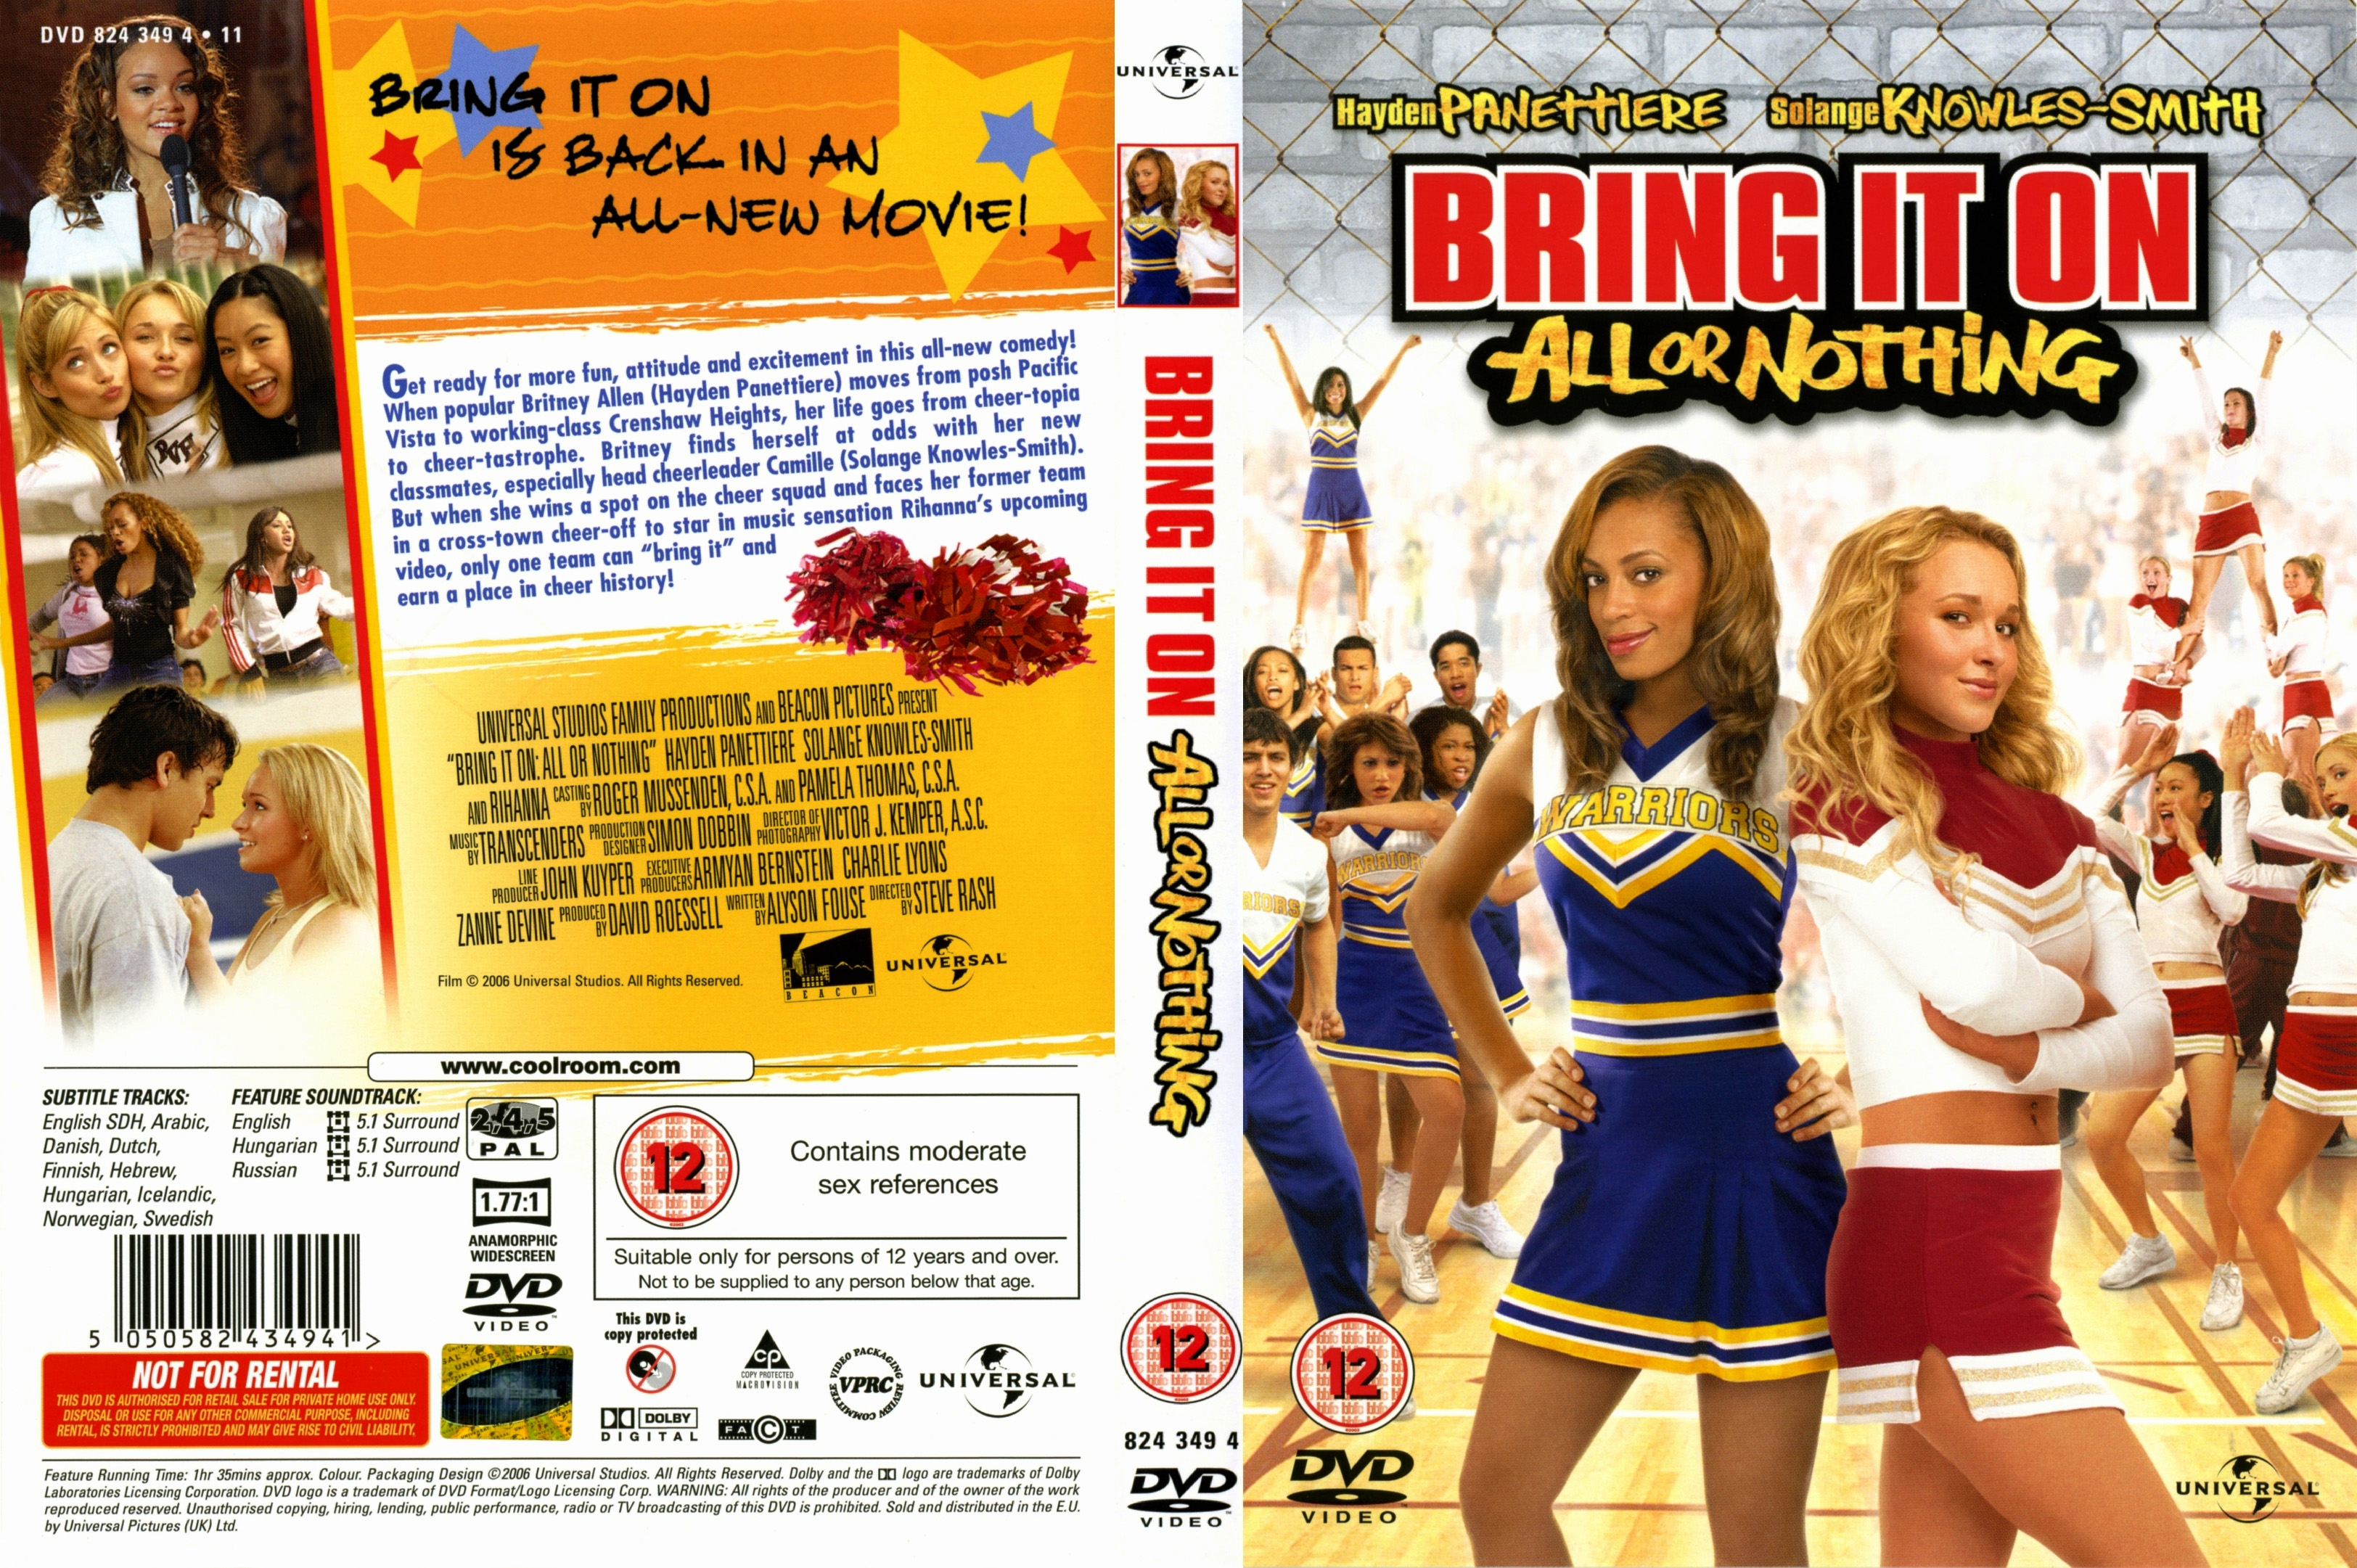 Jaquette DVD Bring it on